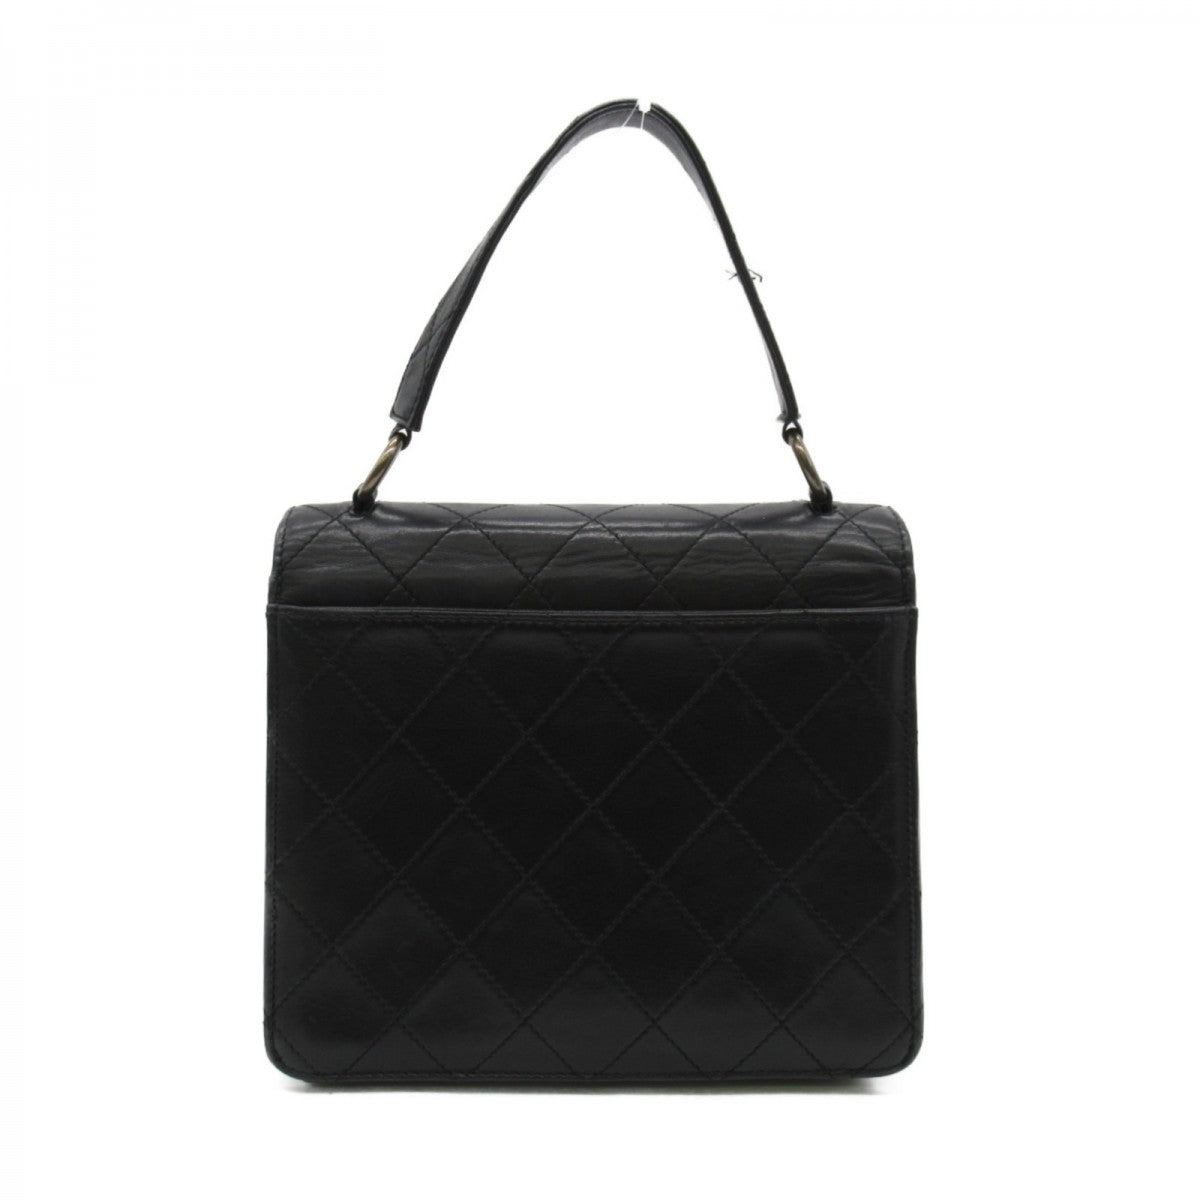 CC Quilted Leather Flap Handbag